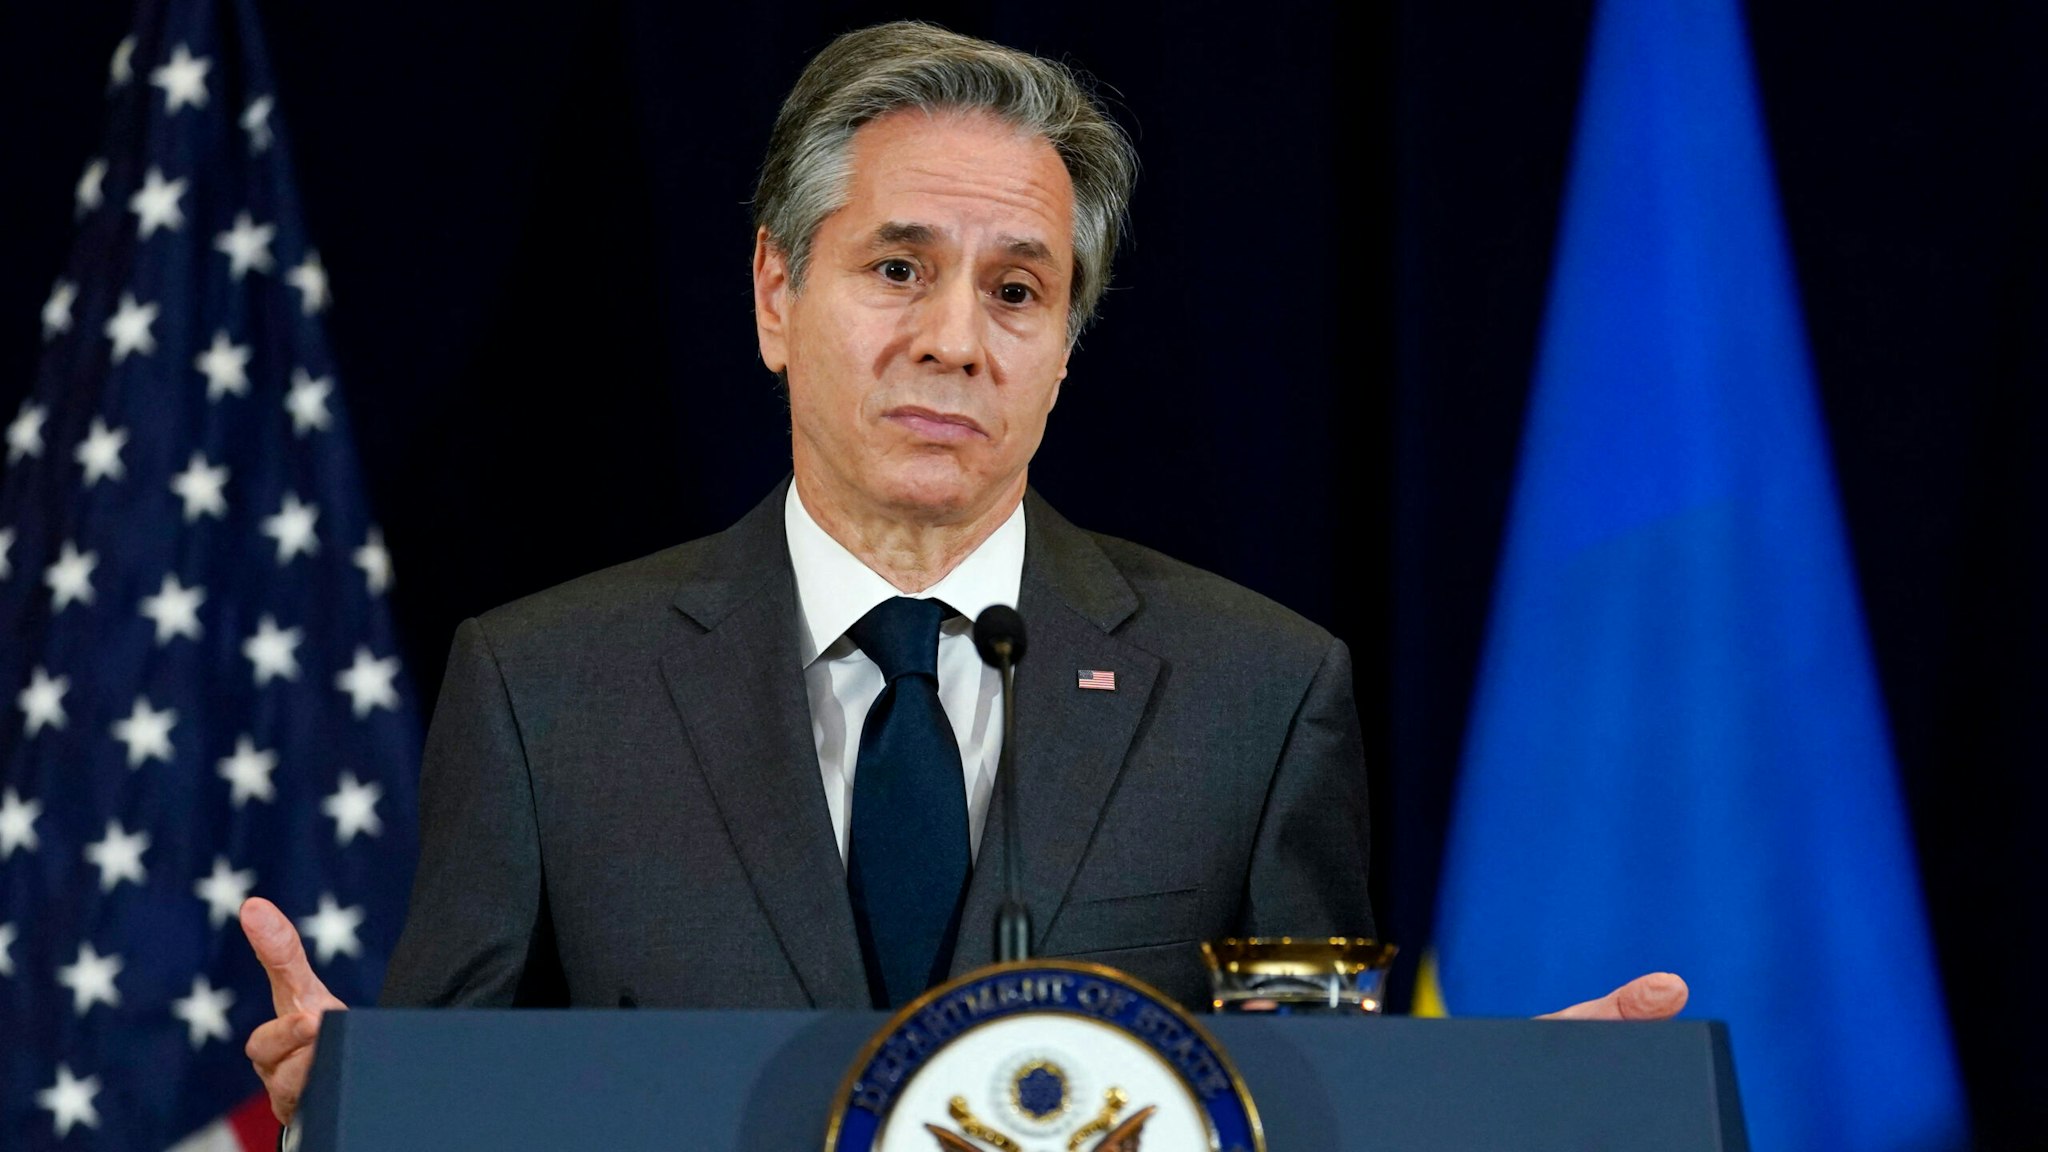 Secretary of State Antony Blinken pauses during a news conference with Ukraine's Foreign Minister Dmytro Kuleba, not pictured, at the State Department in Washington, DC, on February 22, 2022.